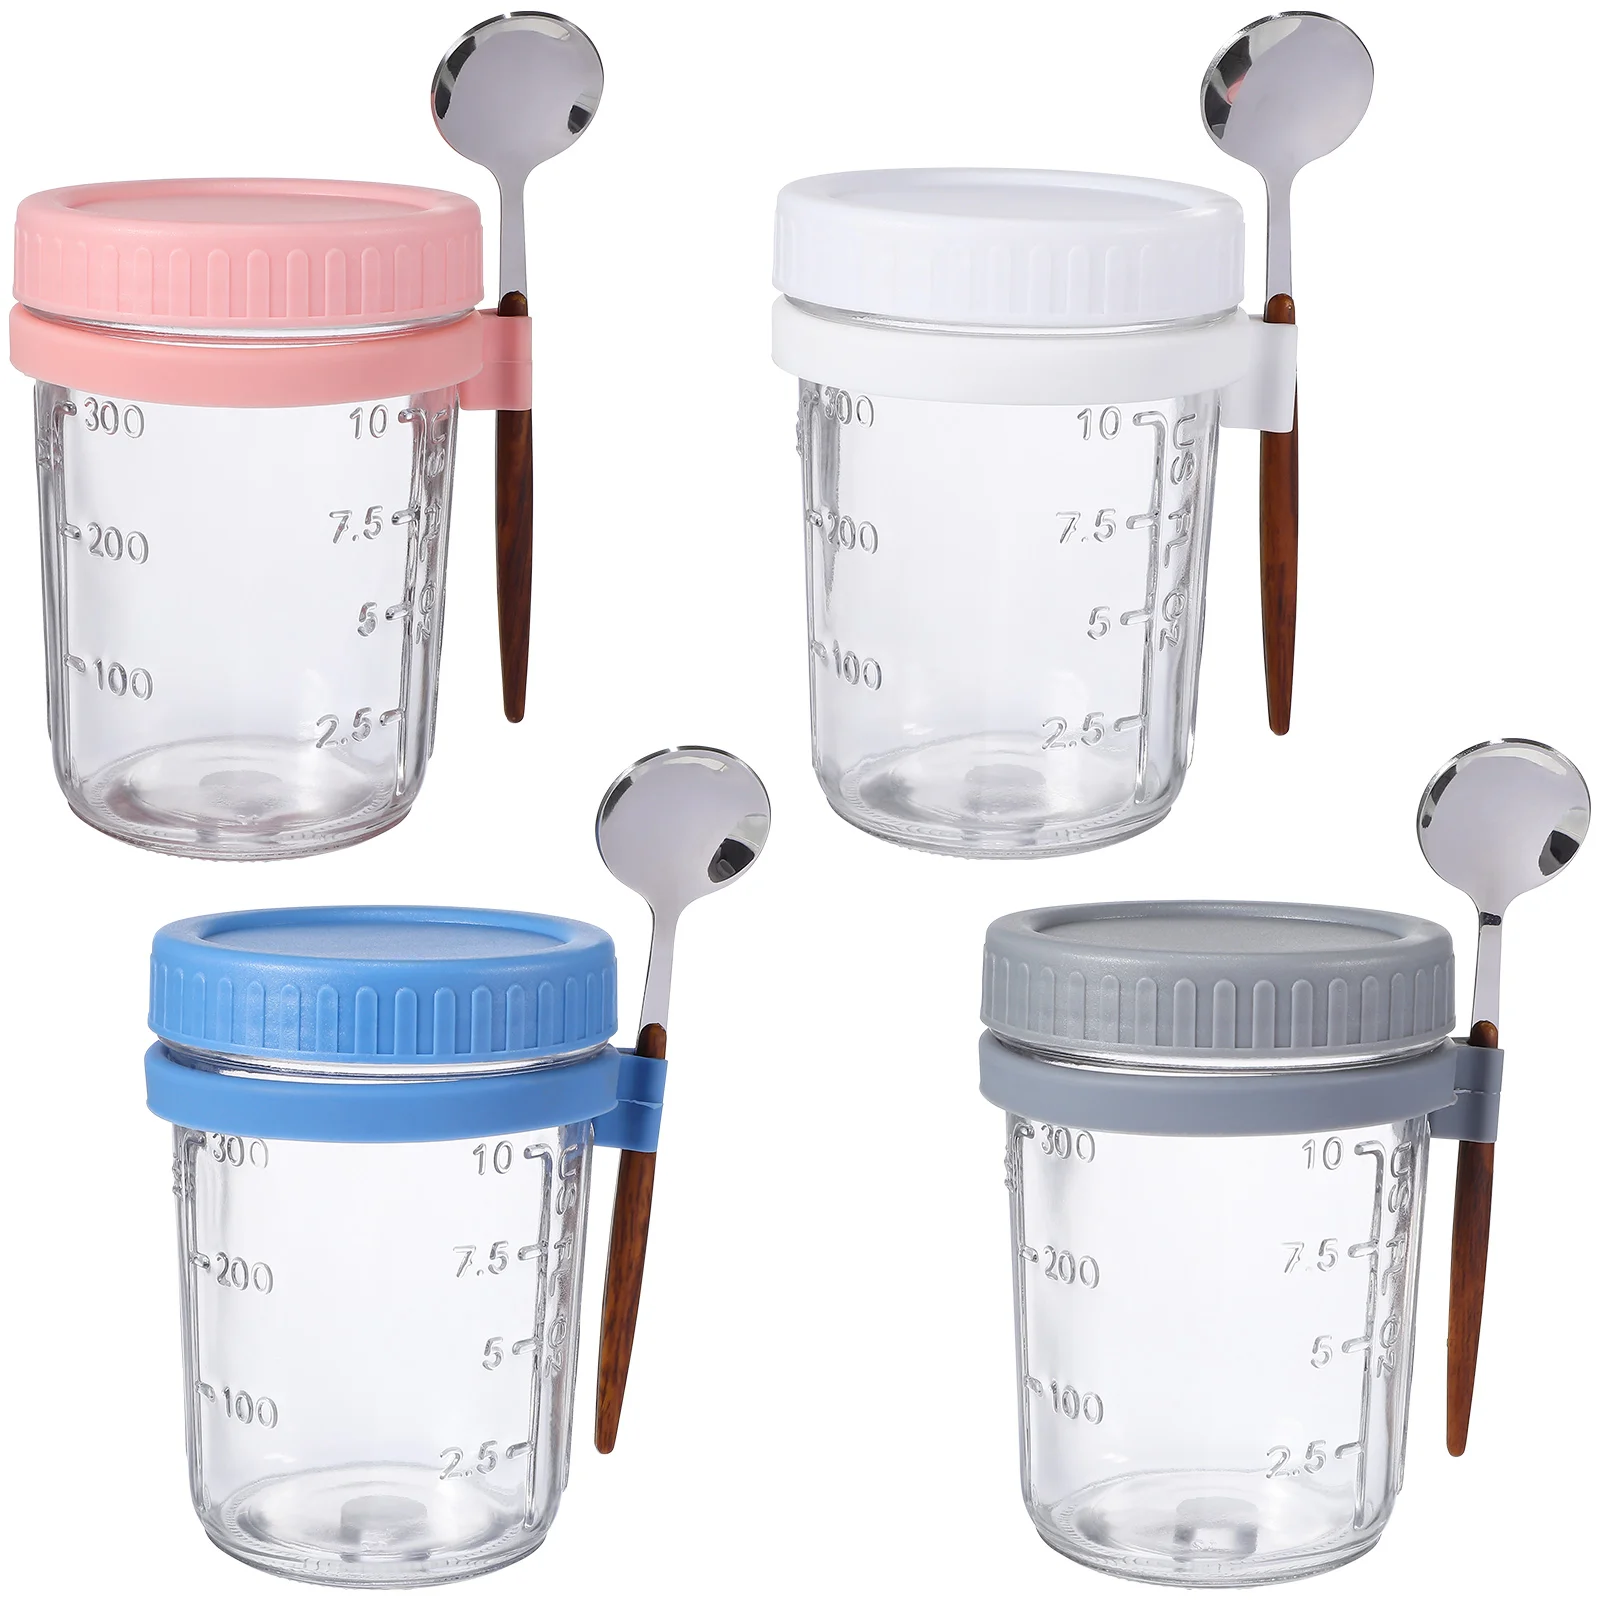 

4 Pcs Mason Jars Breakfast Cup Leak Proof Oatmeal Containers With Lids And Spoons 400ml